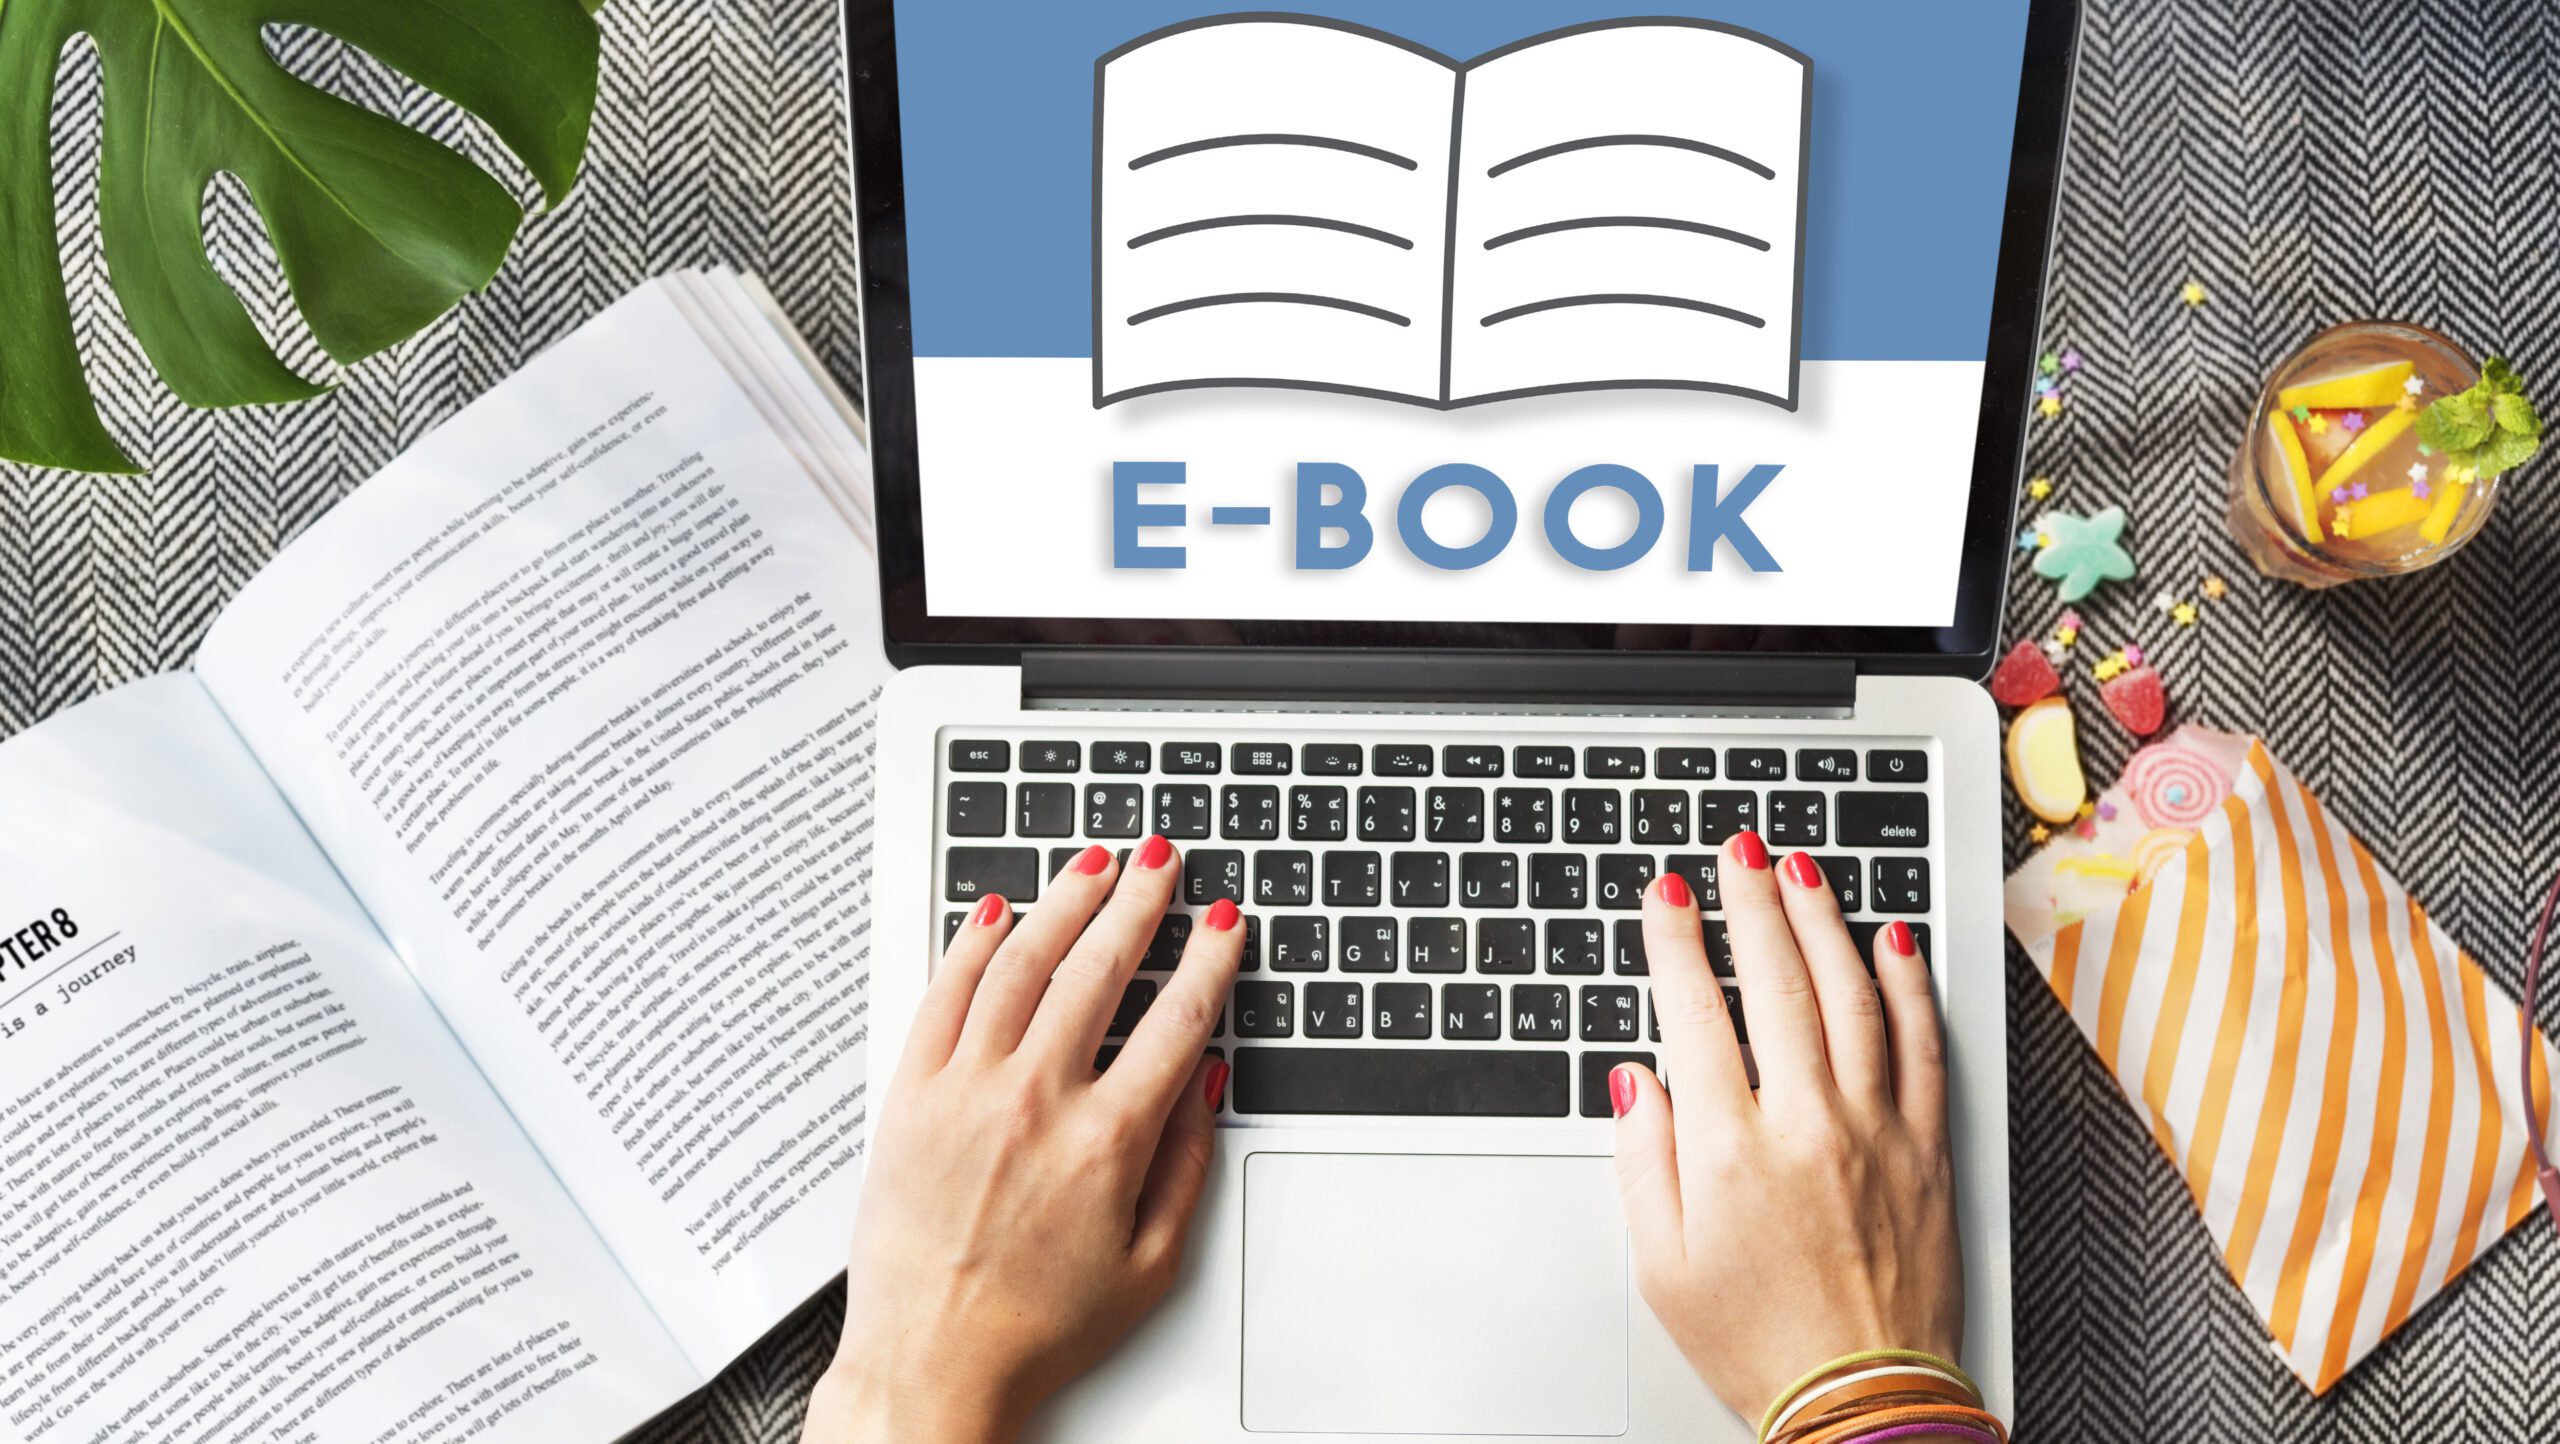 Open Pages Book E-Book Online Learning